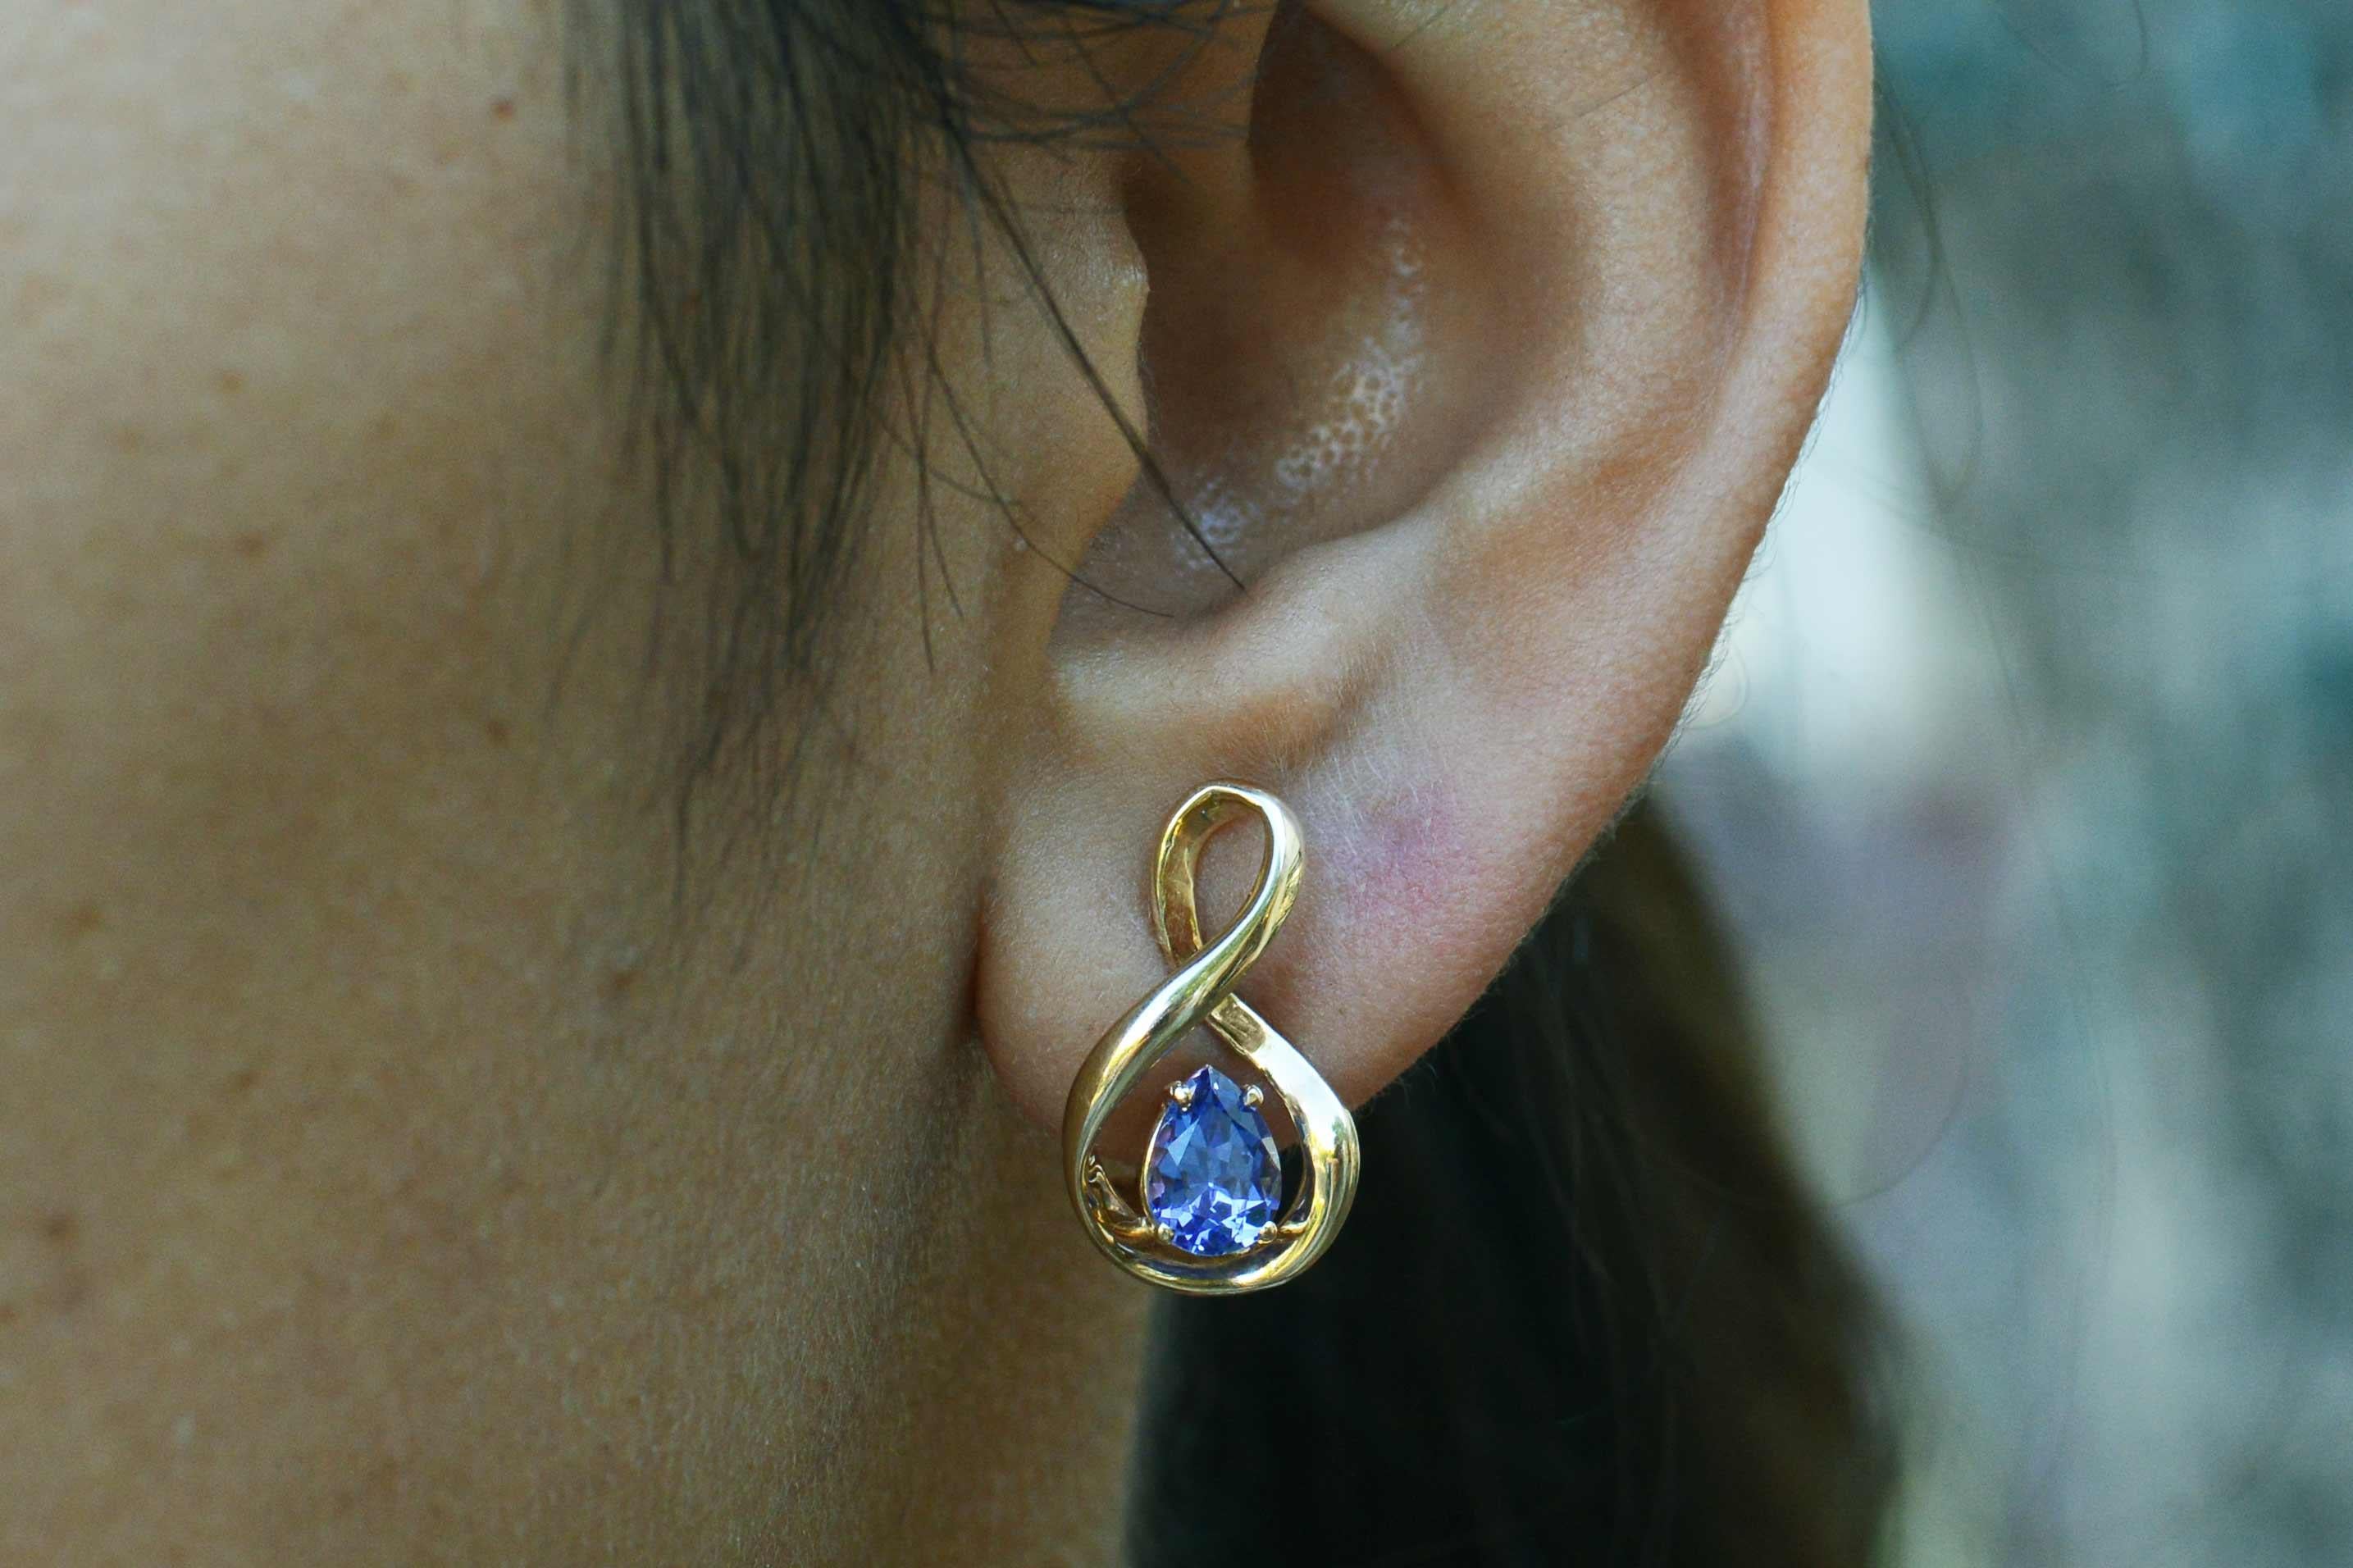 A pair of 1.20 carat diamond and tanzanite earrings with the most riveting violet hue. They're like staring into the beautiful eyes of Liz Taylor! The faceted oval gemstones topped with a cluster of captivating diamonds completes these modern estate